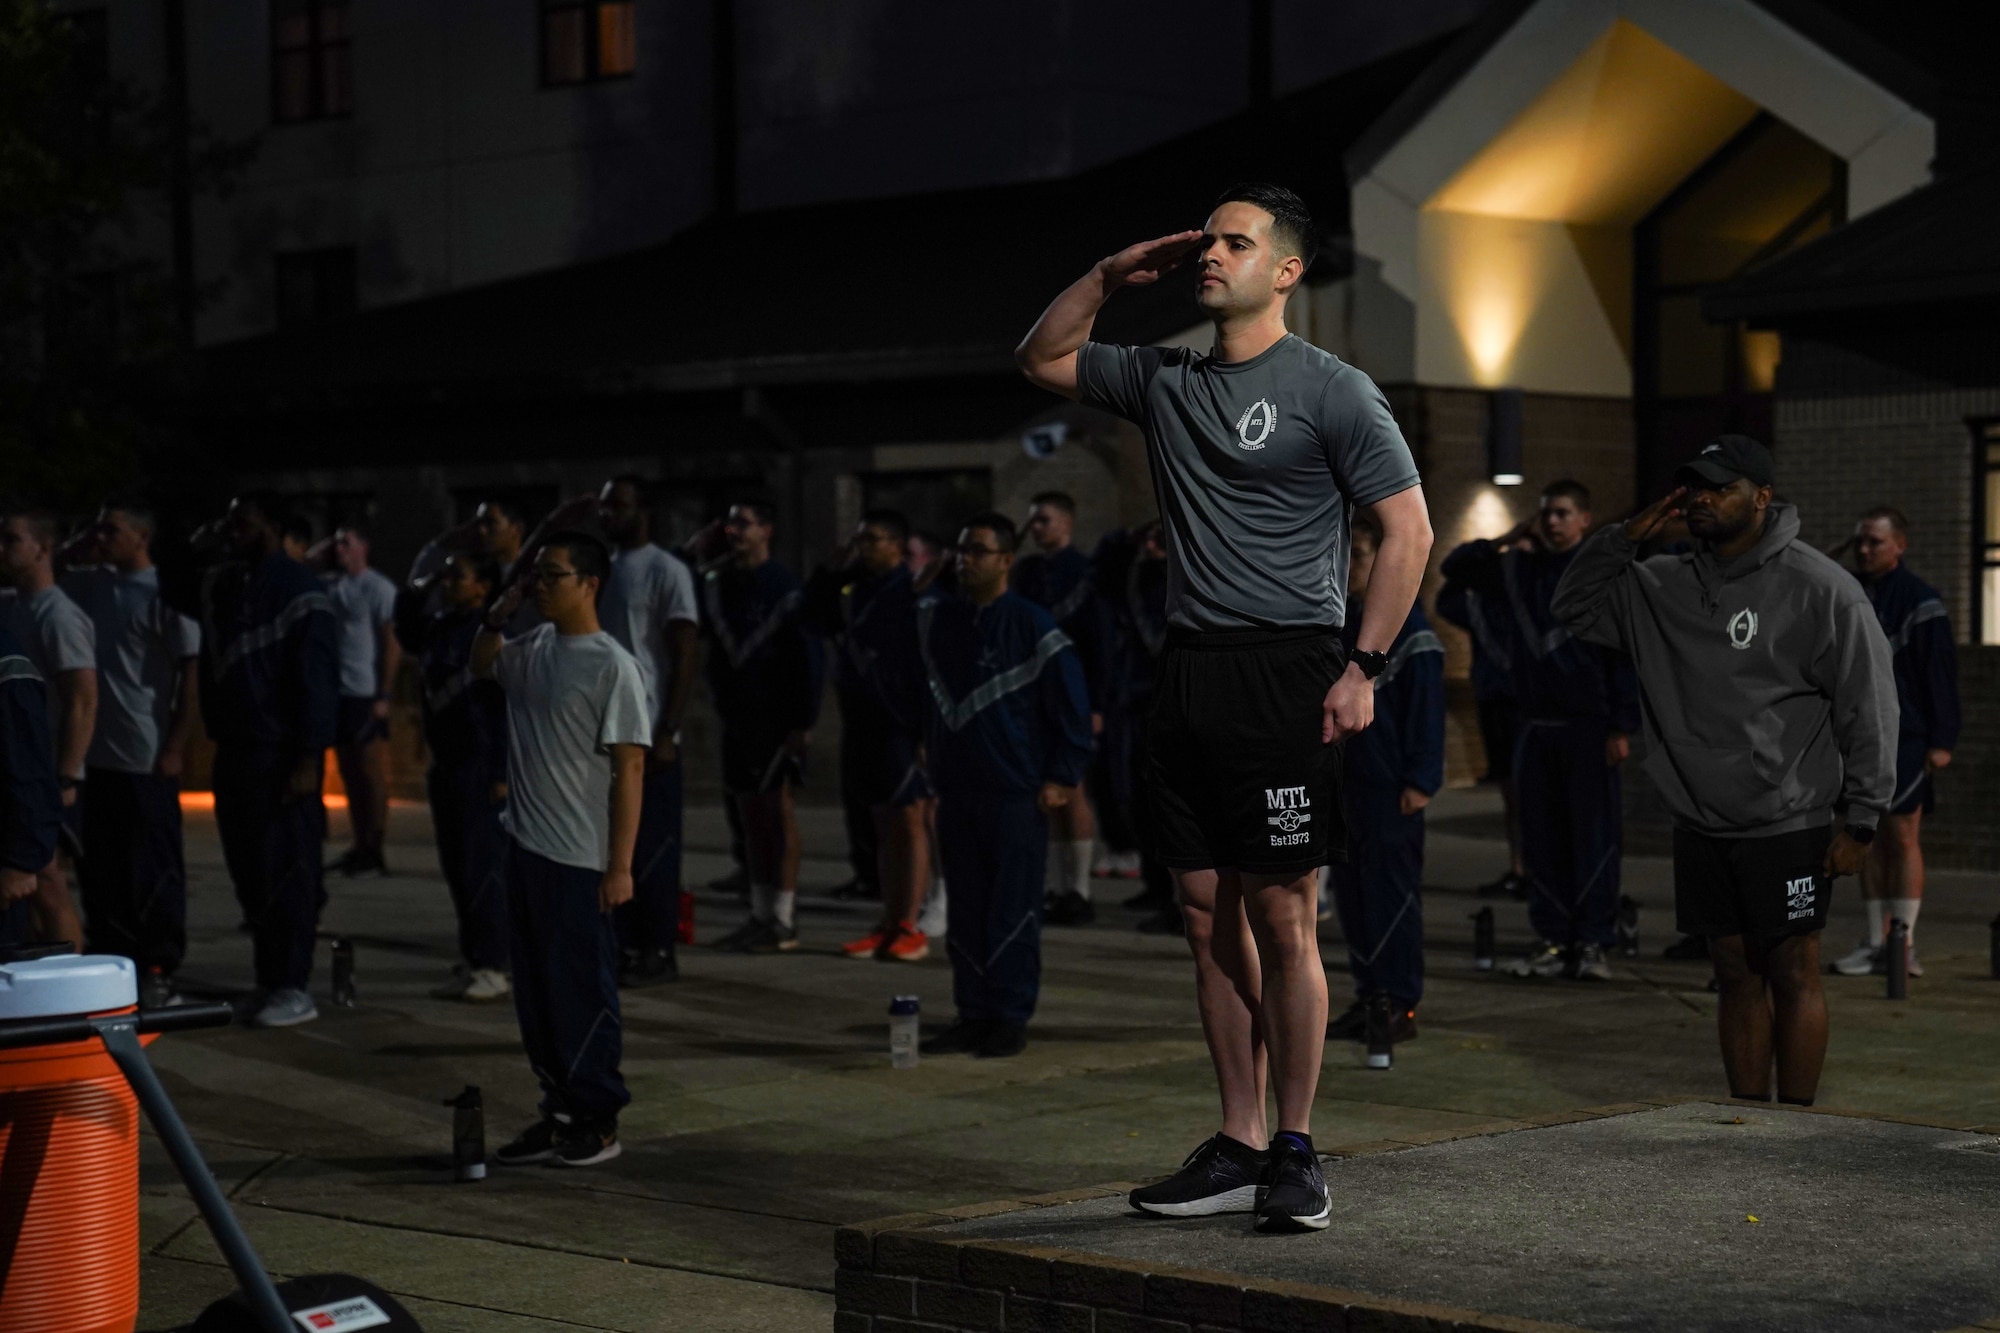 U.S. Air Force Staff Sgt. Juan Loera, 336th Training Squadron military training leader, salutes to flag during reveille at Keesler Air Force Base on Nov. 28, 2022.